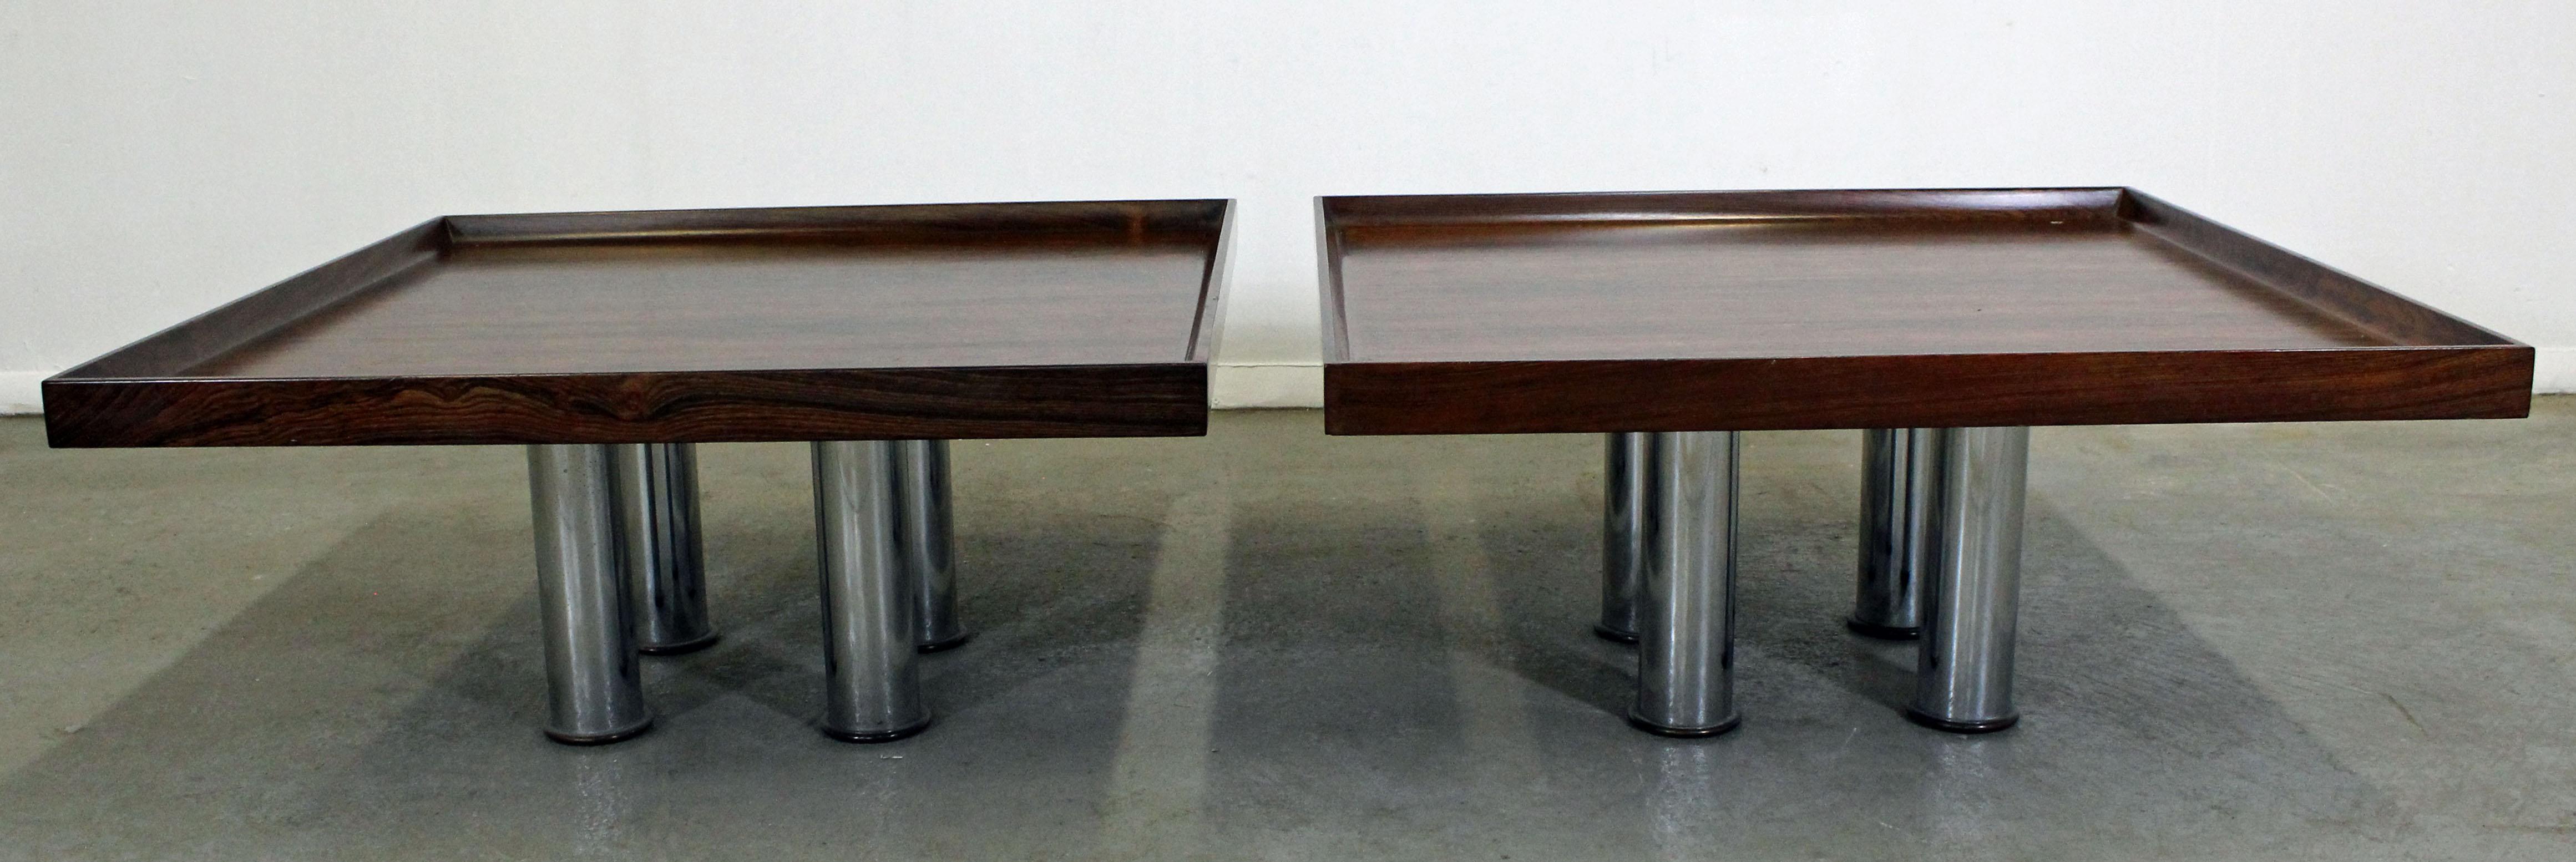 Mid-Century Modern Pair of Midcentury Danish Modern Knoll Rosewood Chrome Coffee or End Tables